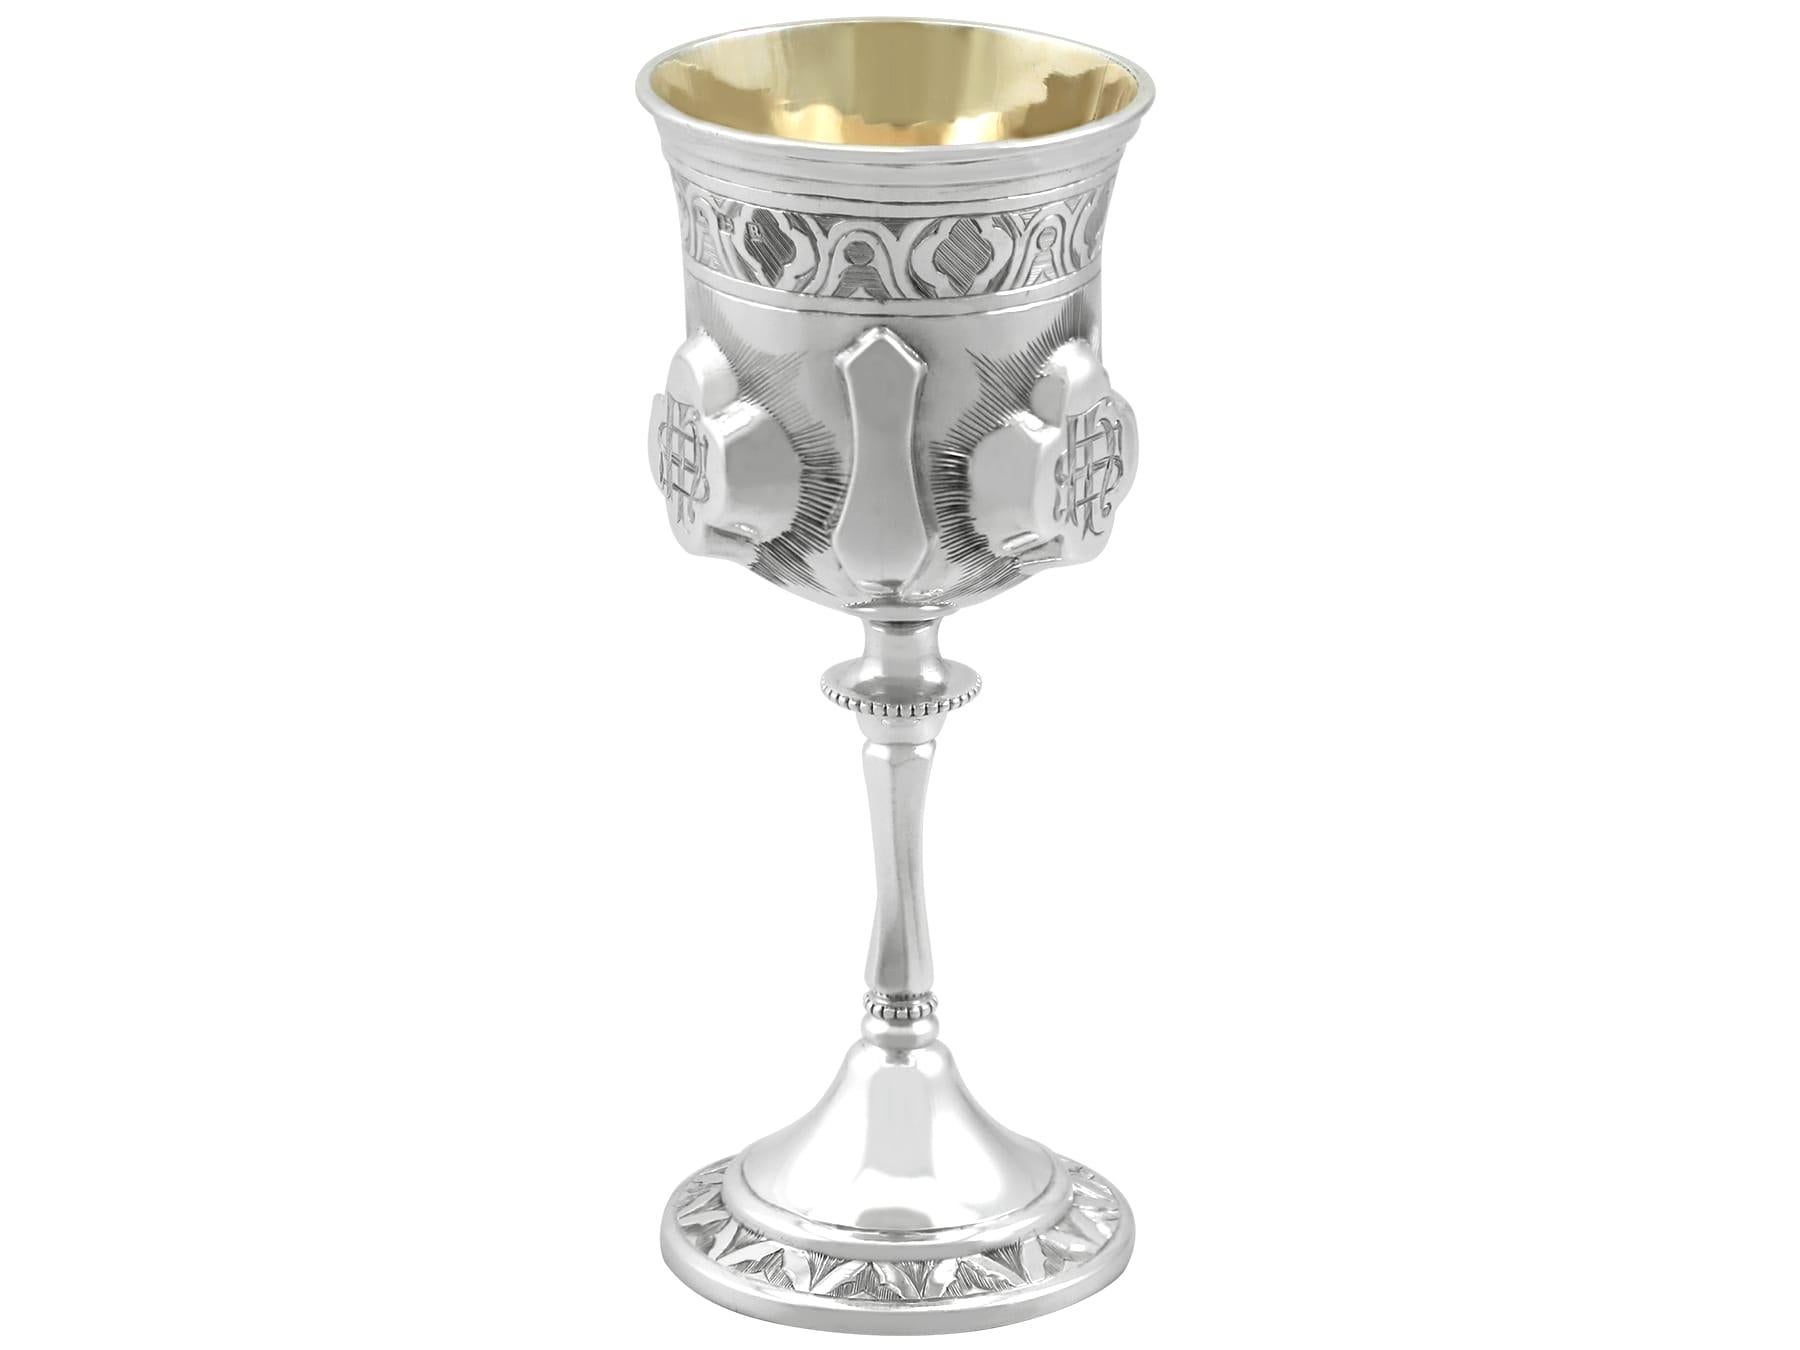 Antique Victorian Sterling Silver Communion Set (1866) In Excellent Condition For Sale In Jesmond, Newcastle Upon Tyne